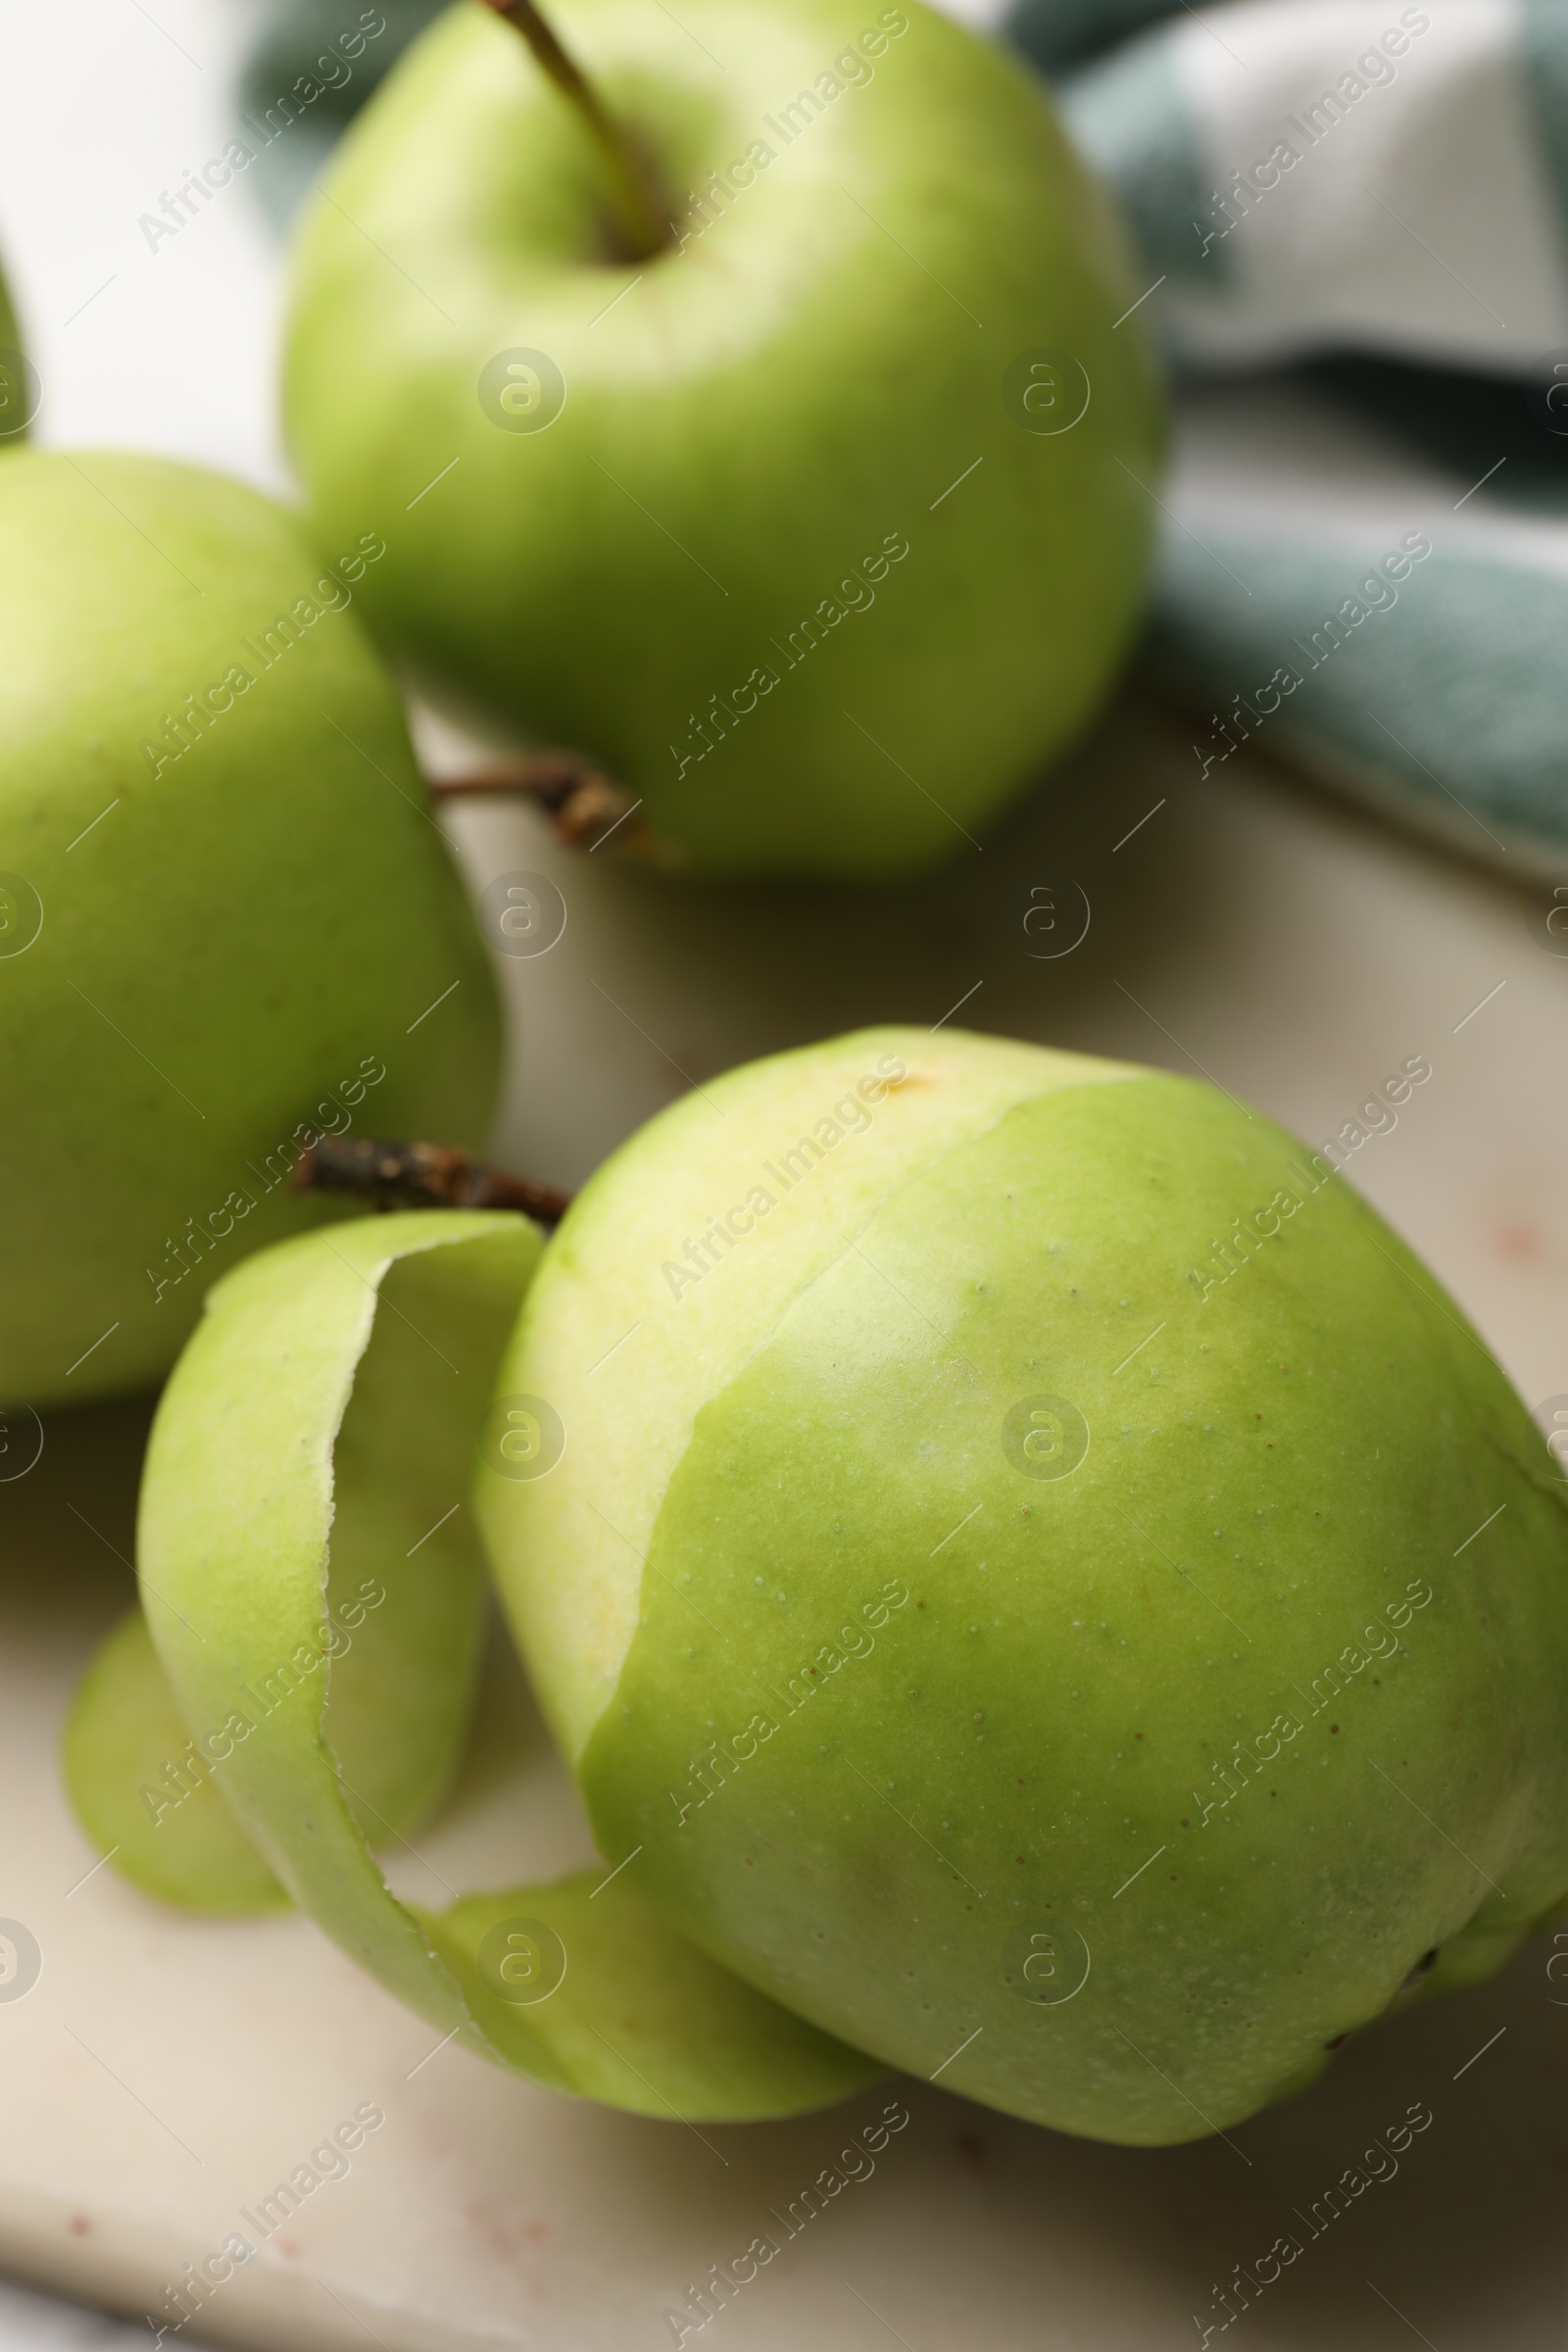 Photo of Ripe green apples on table, closeup view